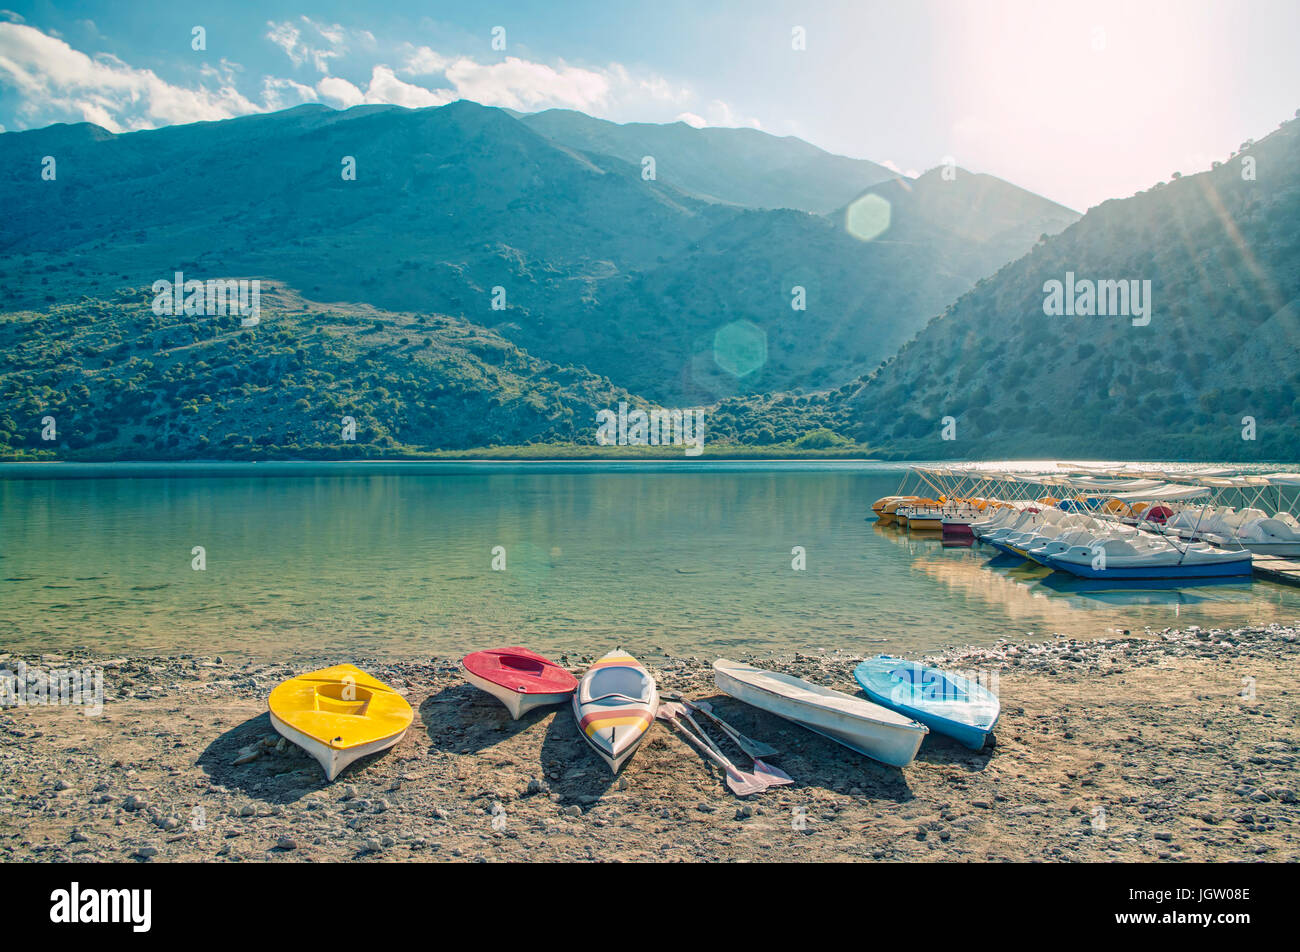 cross-processed image of beautiful lake Kournaskayak surrounded by mountains and paddle boat rental at sunset, Crete, Greece Stock Photo